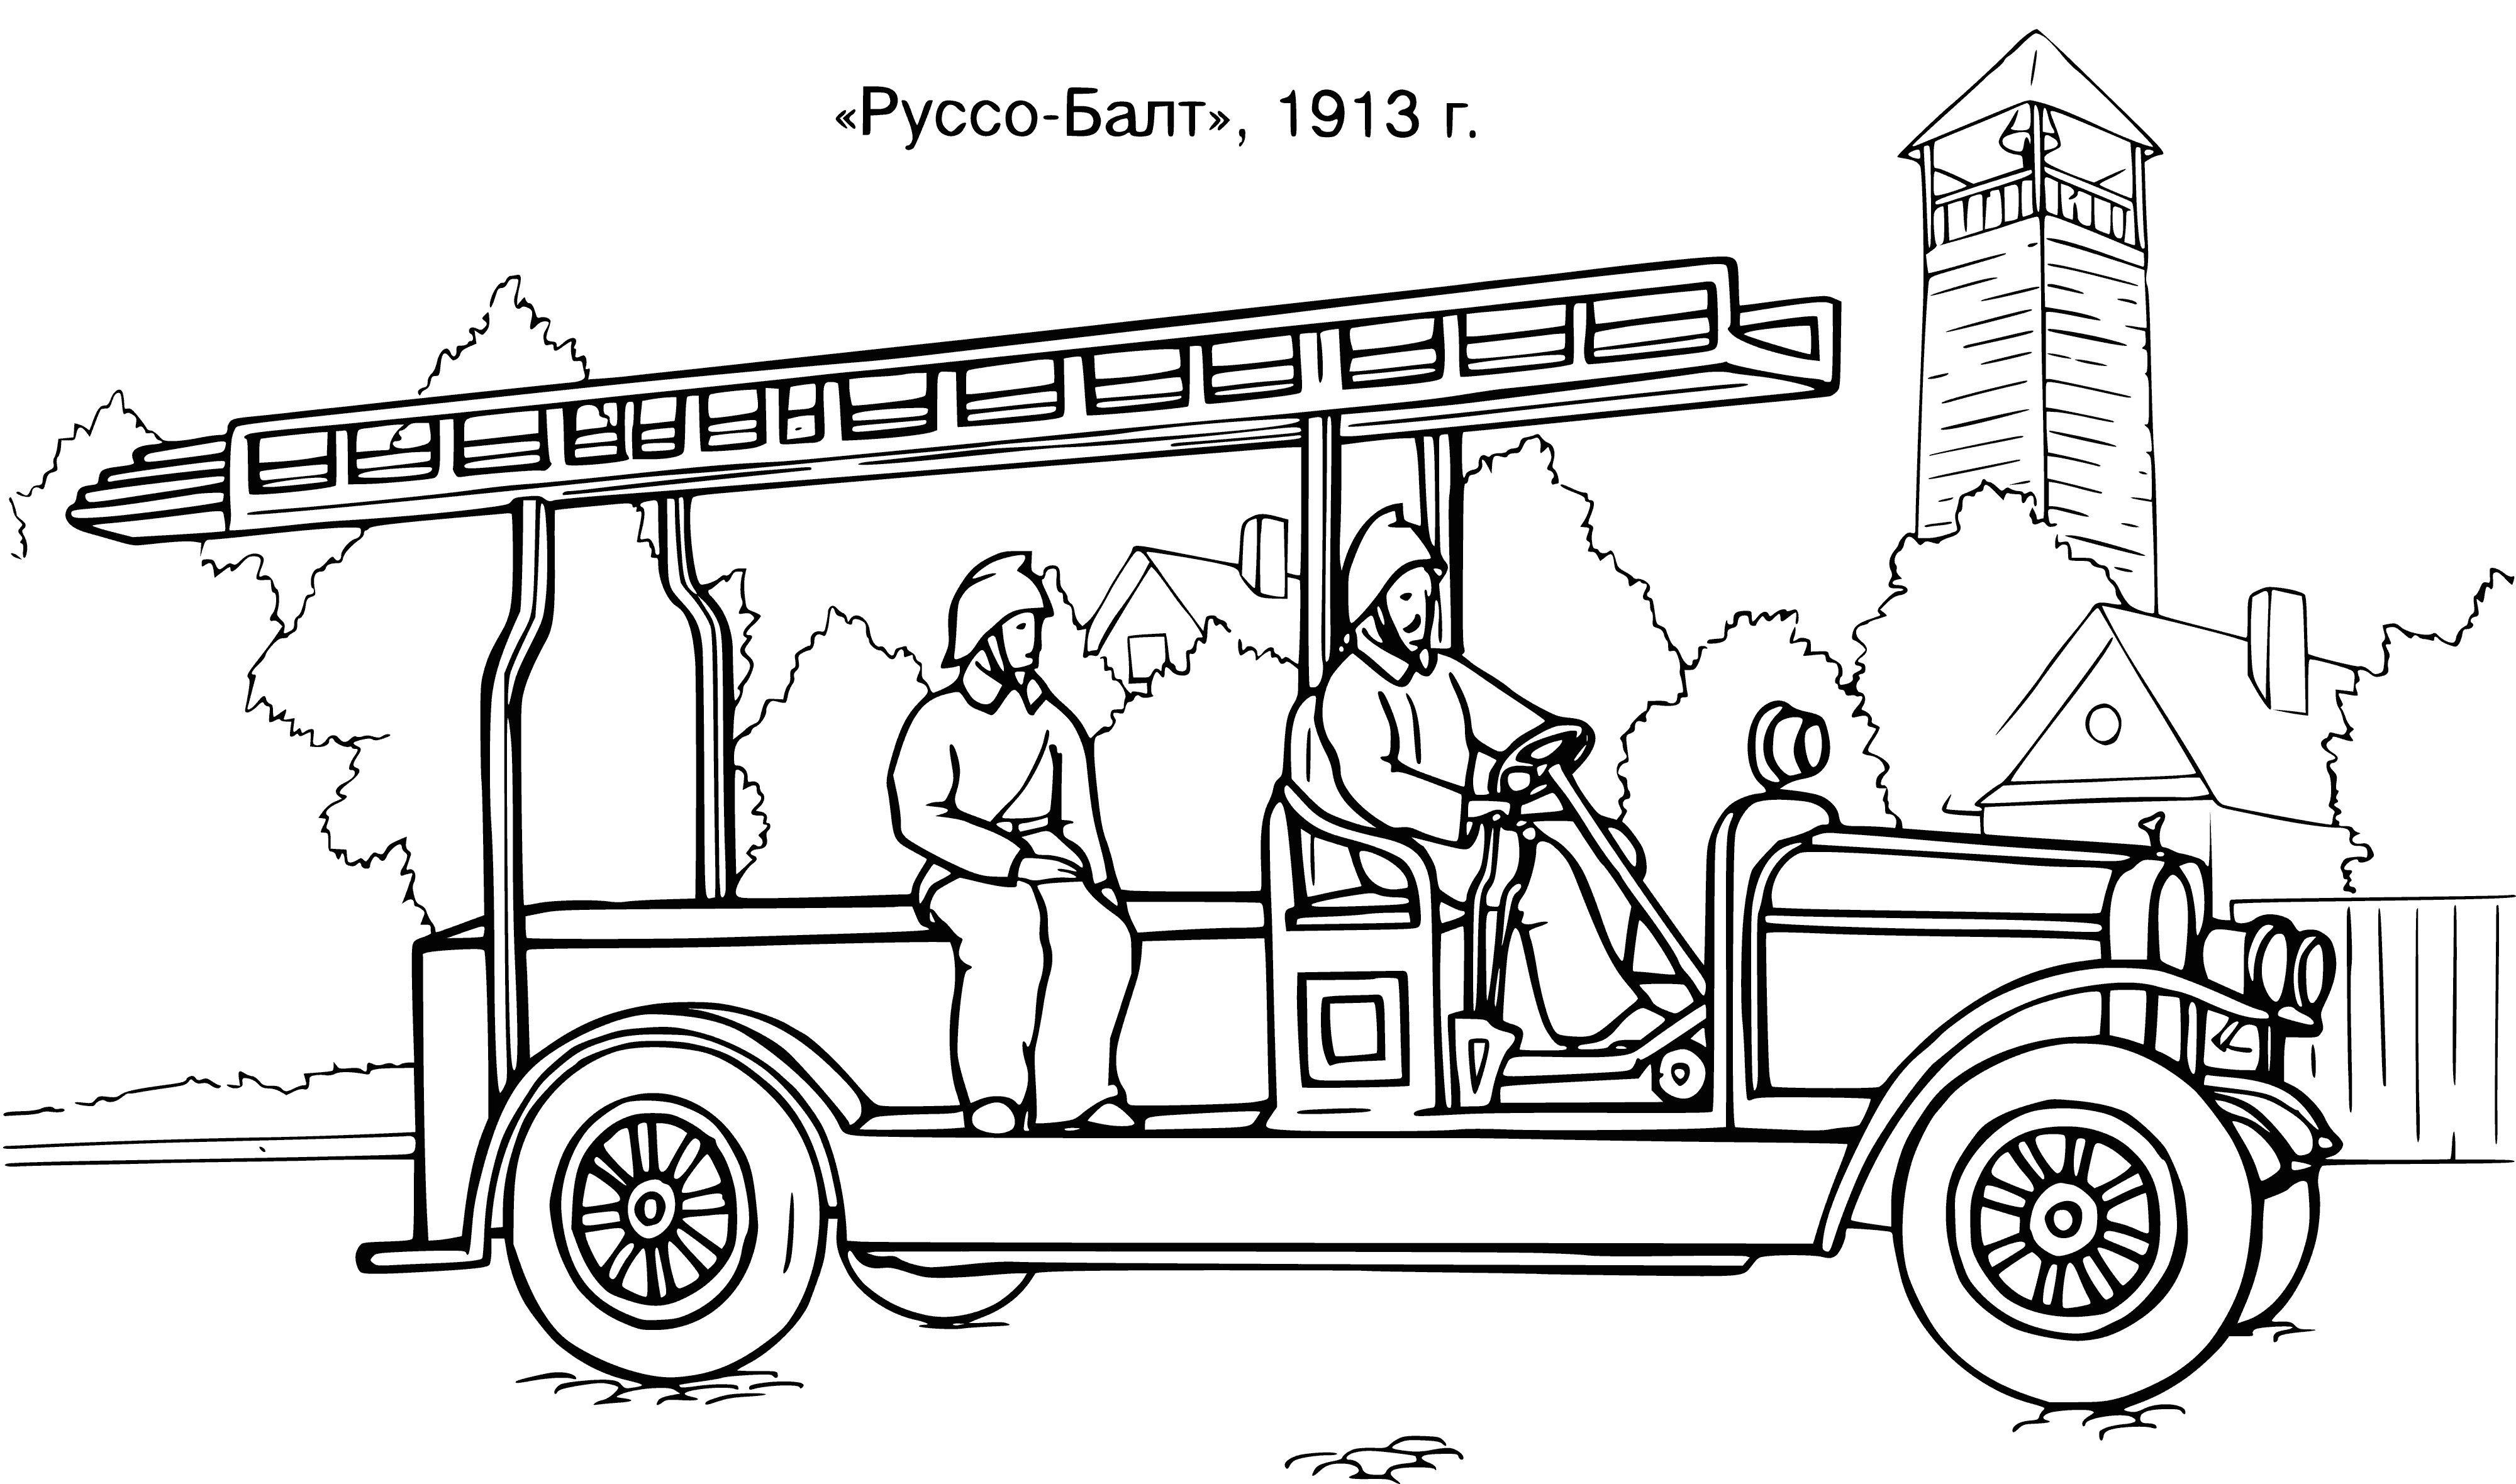 coloring page: Firefighters in bright yellow helmets drive a red truck w/ 6 wheel-ladder & hose down a city street. Siren blaring.